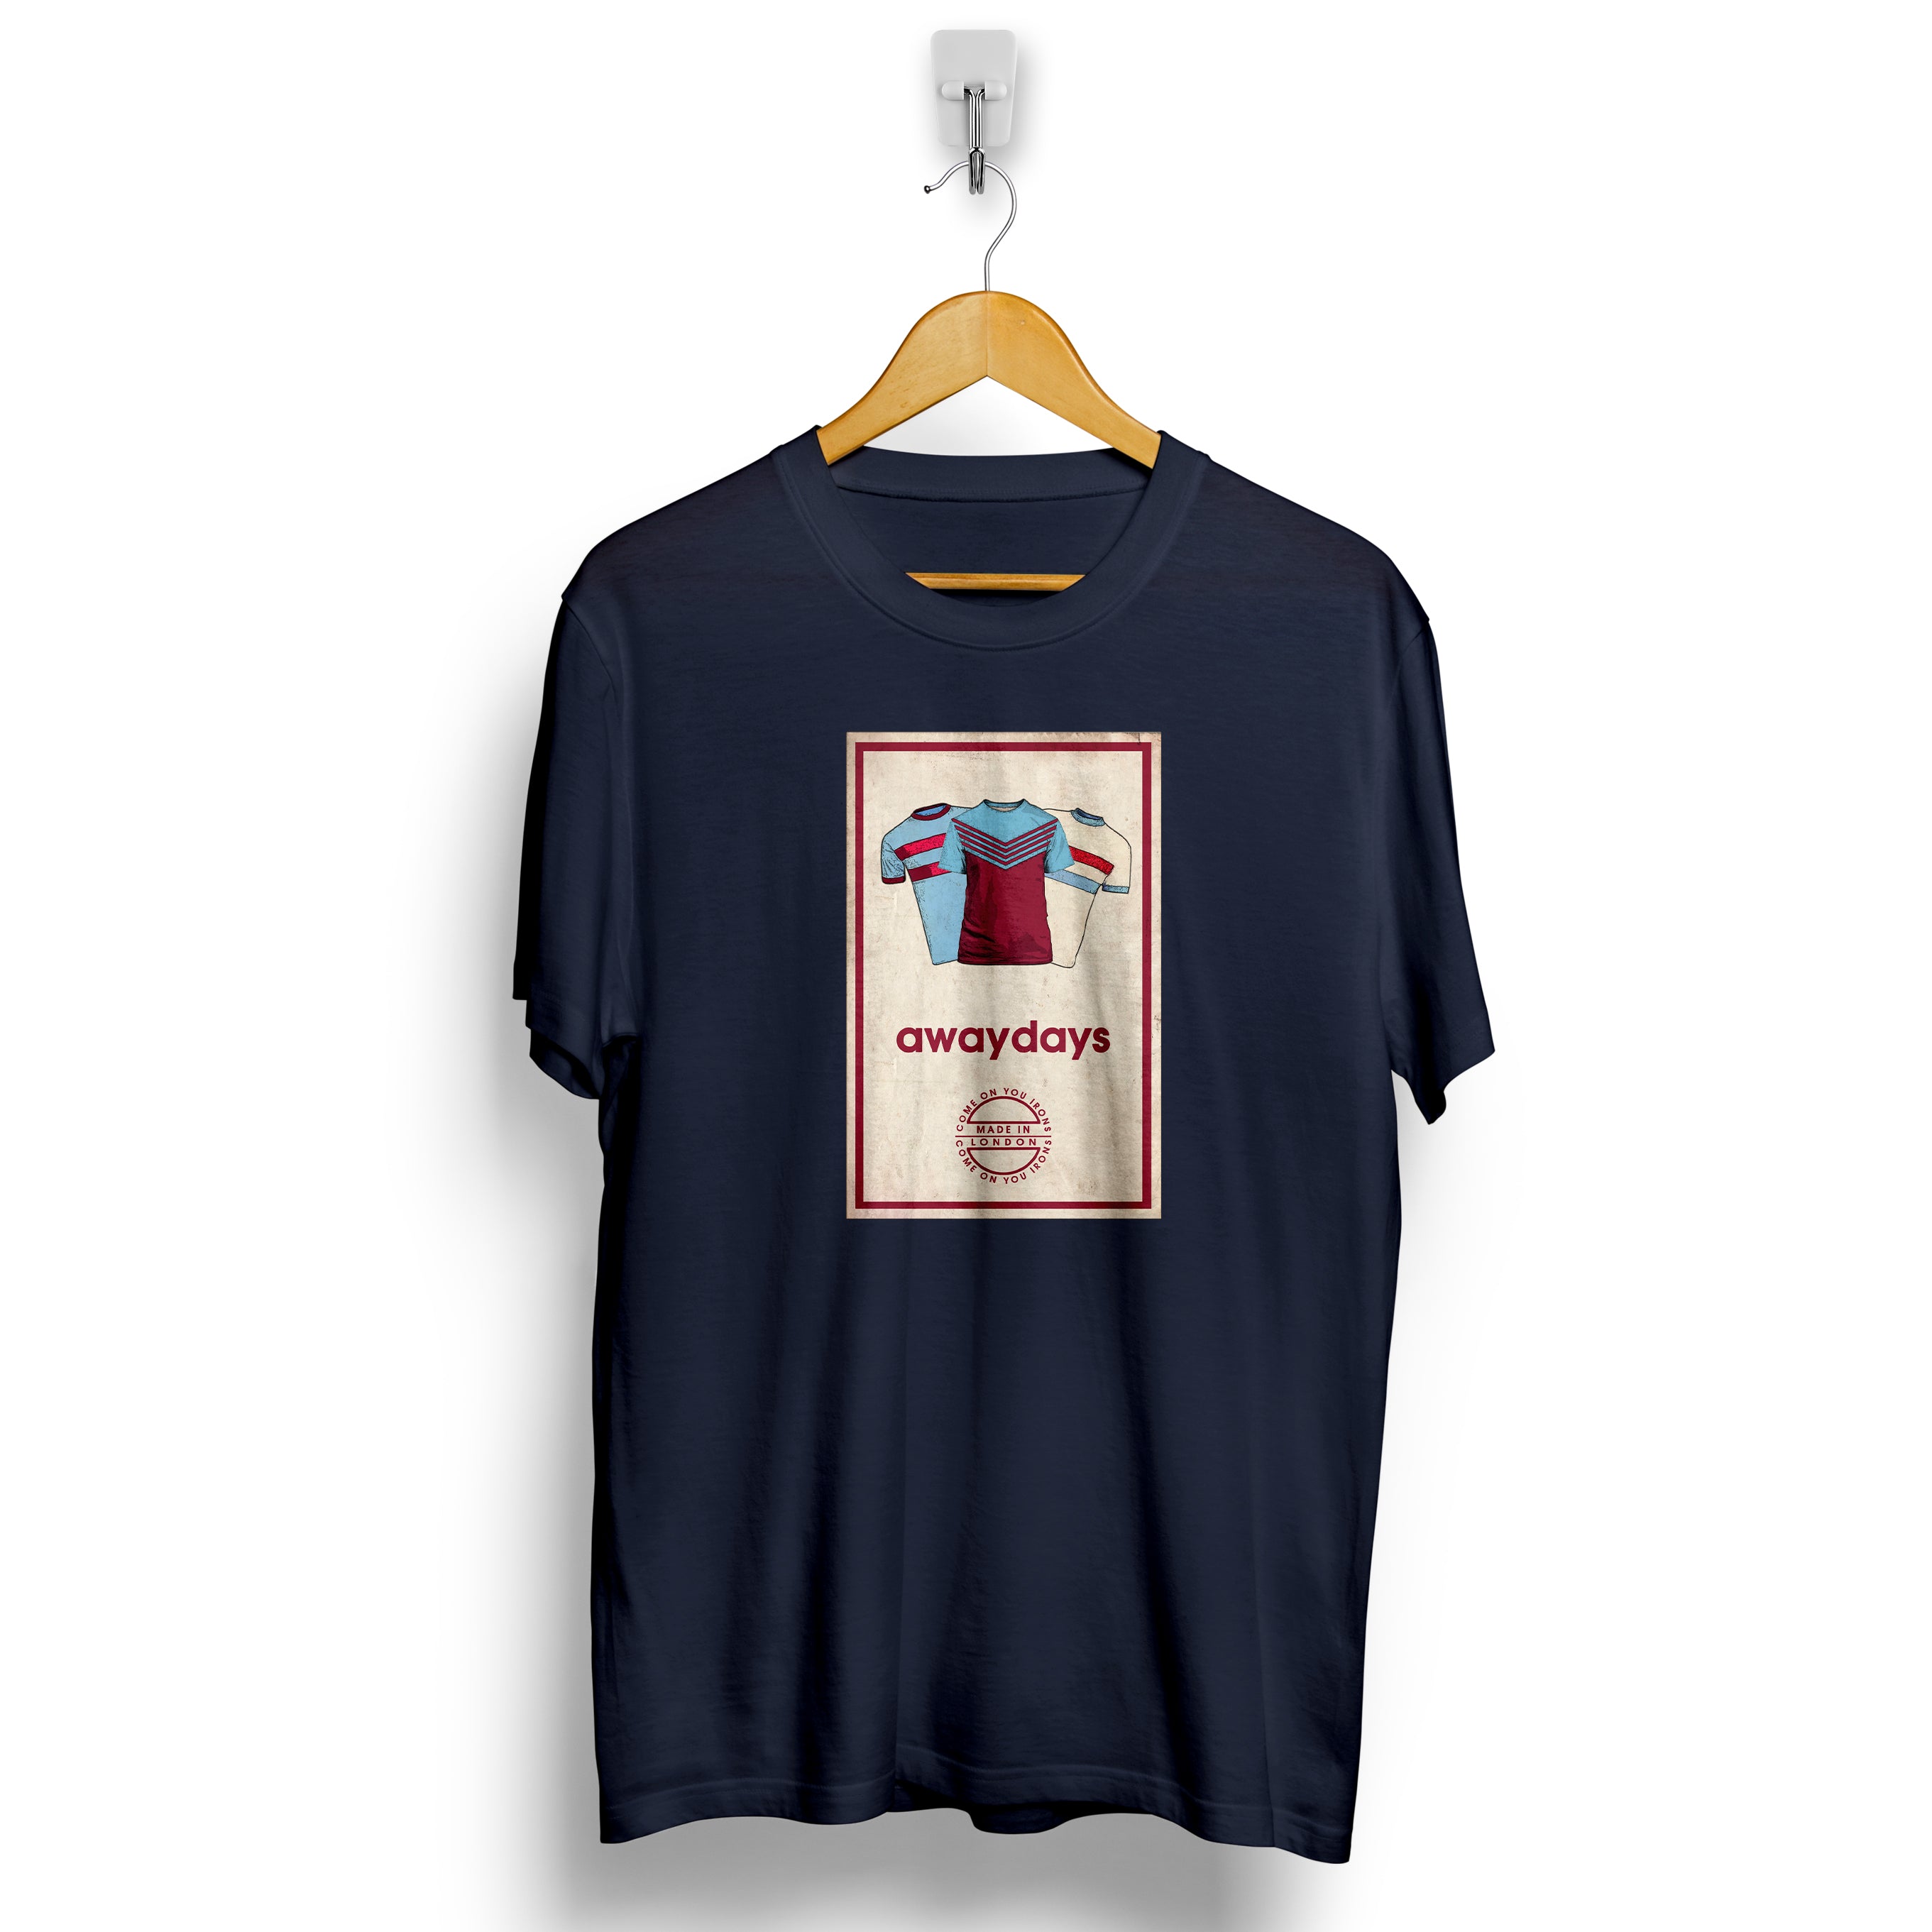 East London's Finest Retro Shirts| Football Casuals 80s Dressers Subculture T Shirt